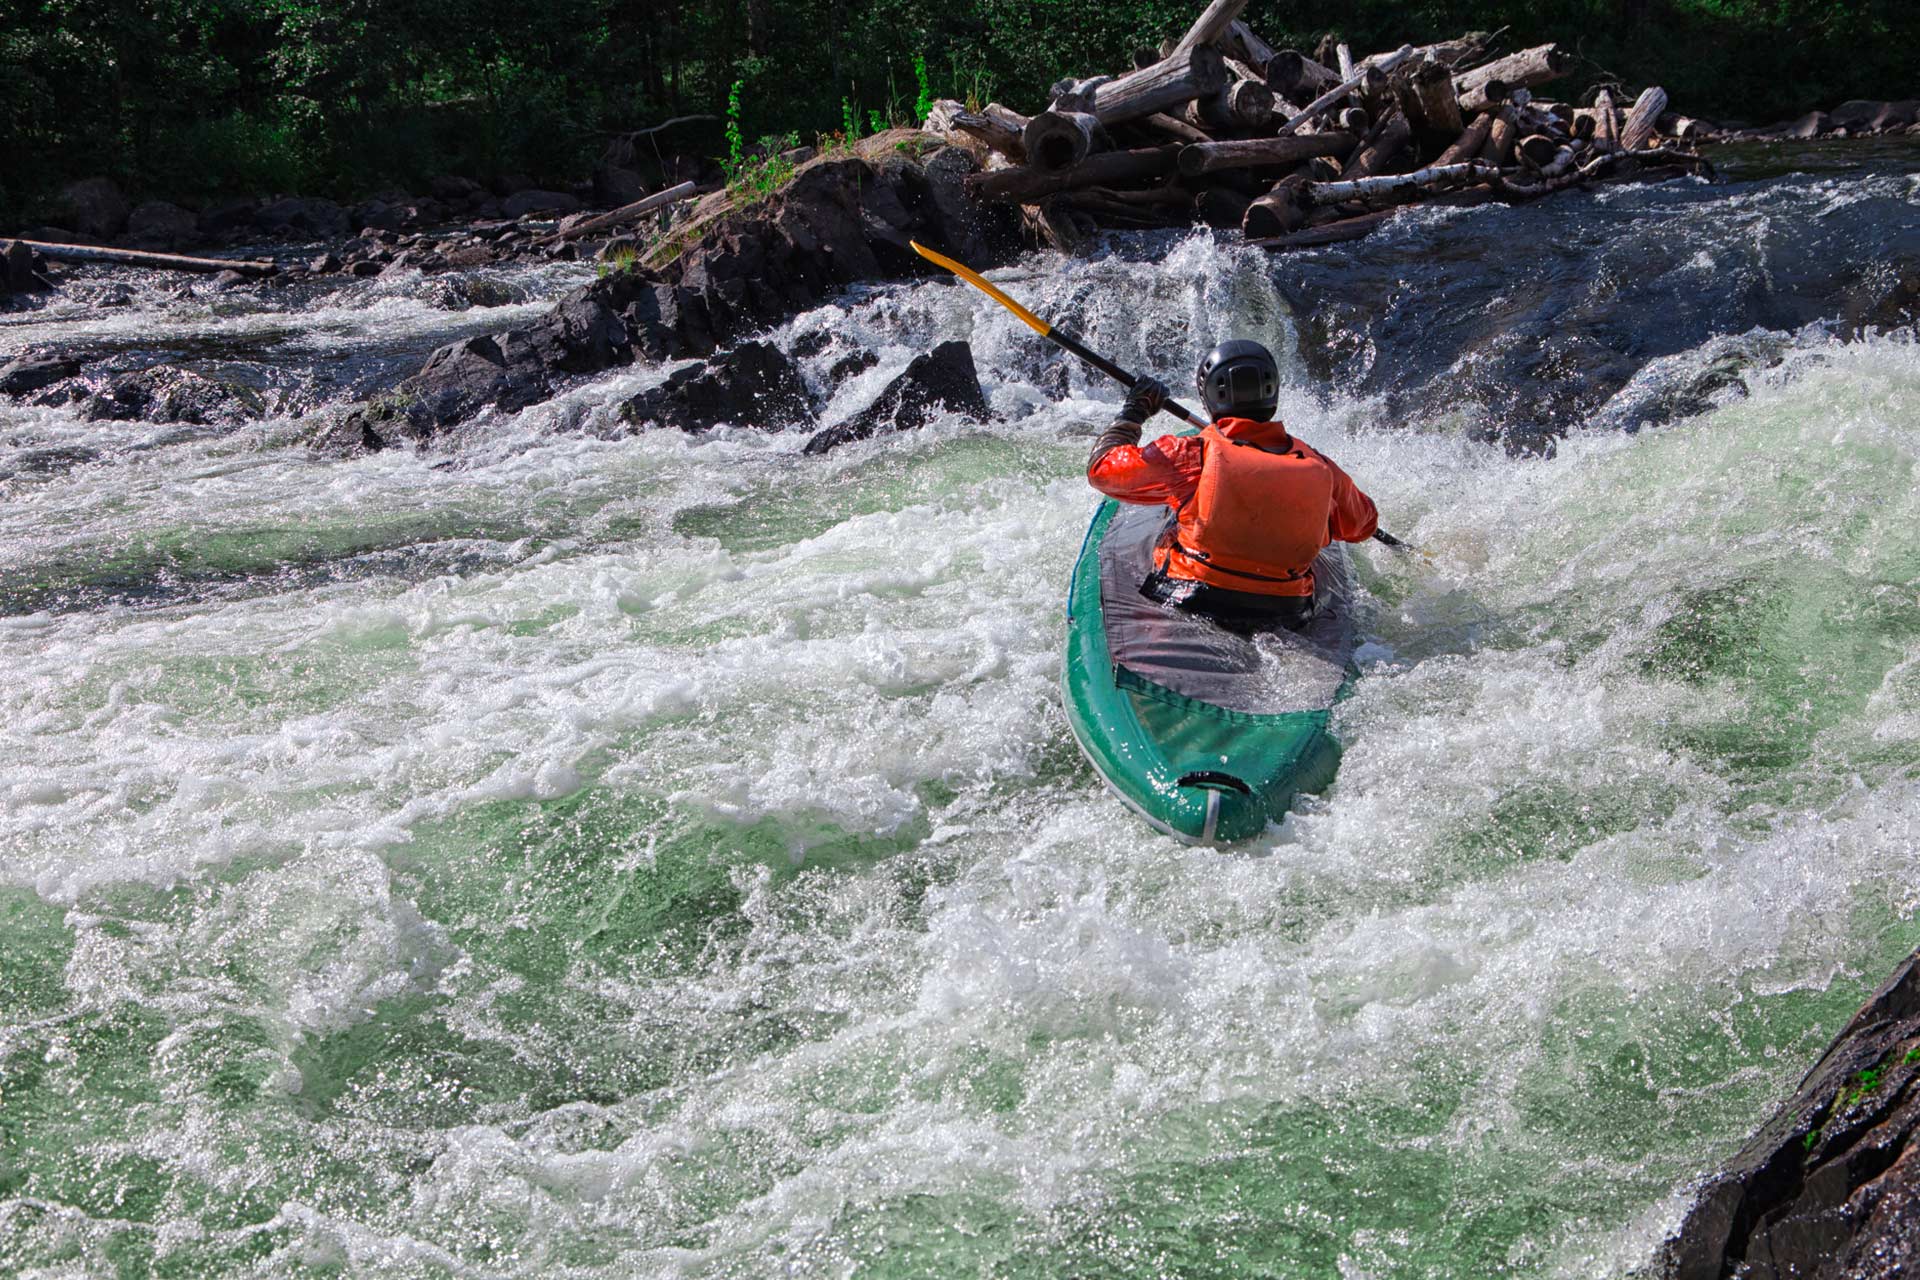 Solo kayaker navigating rapids, representing the effort and skill needed to navigate the cannabis industry.